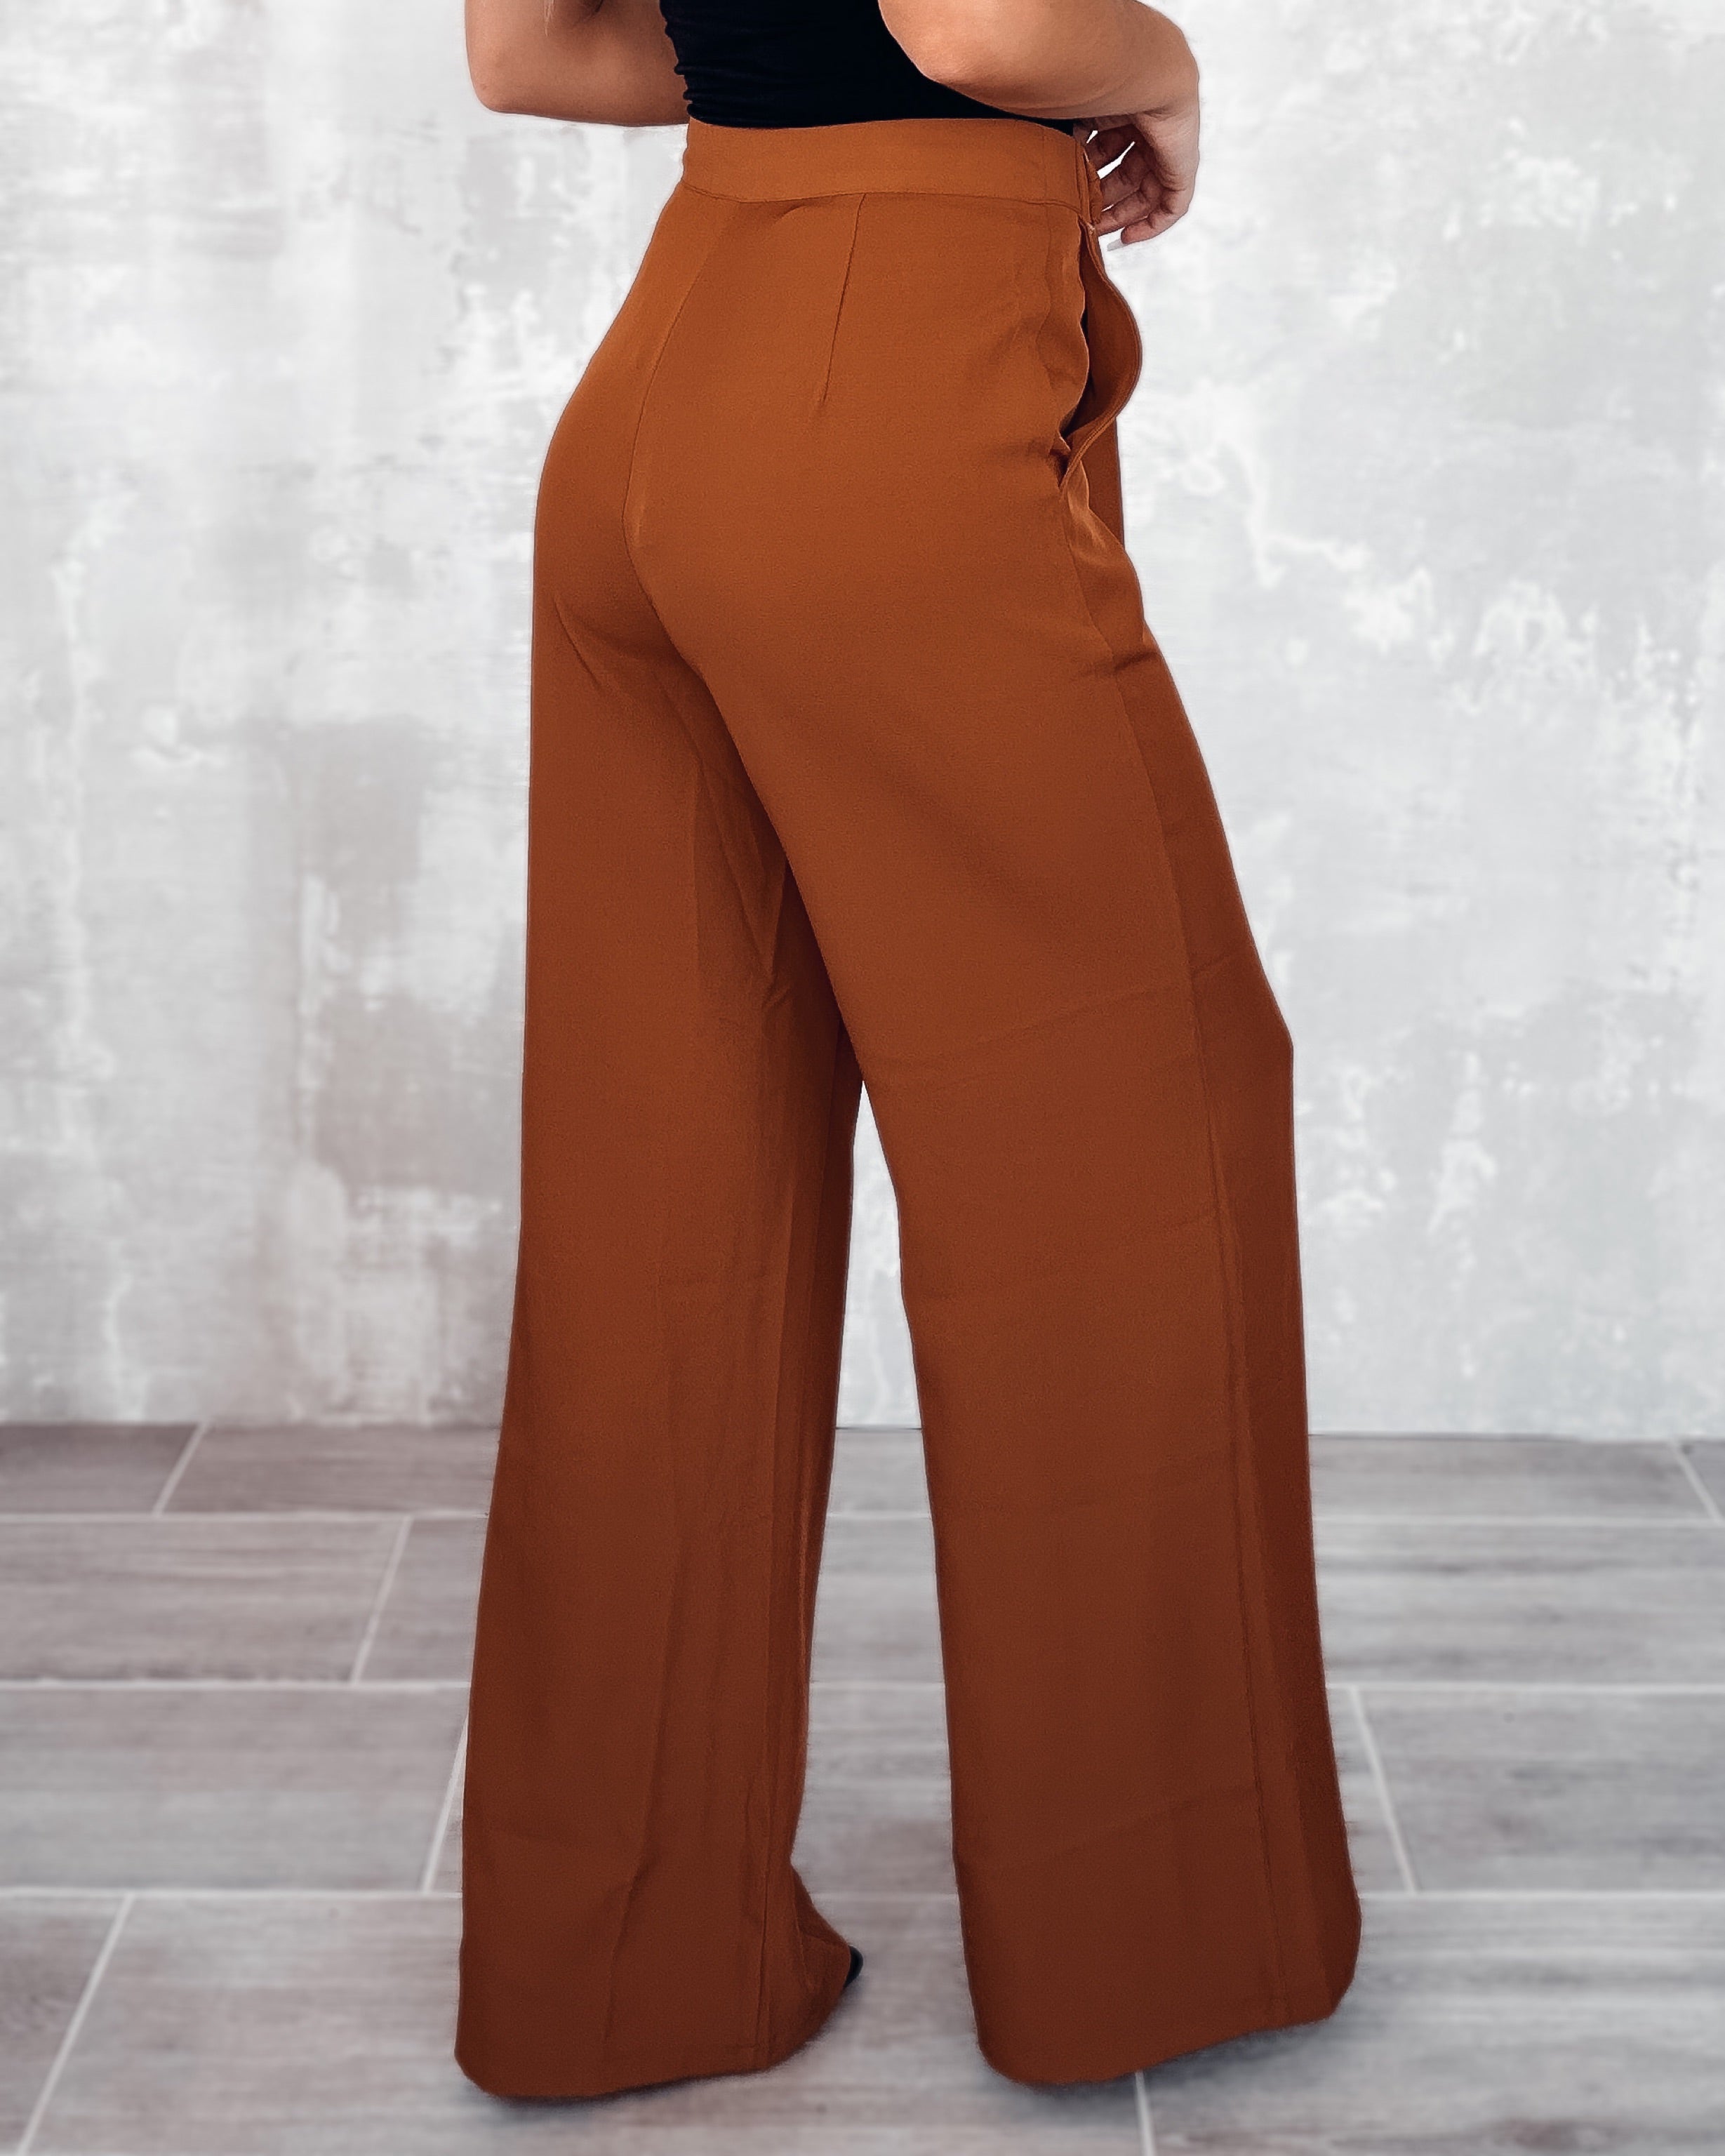 Belted Boss Babe Pants - Copper Brown